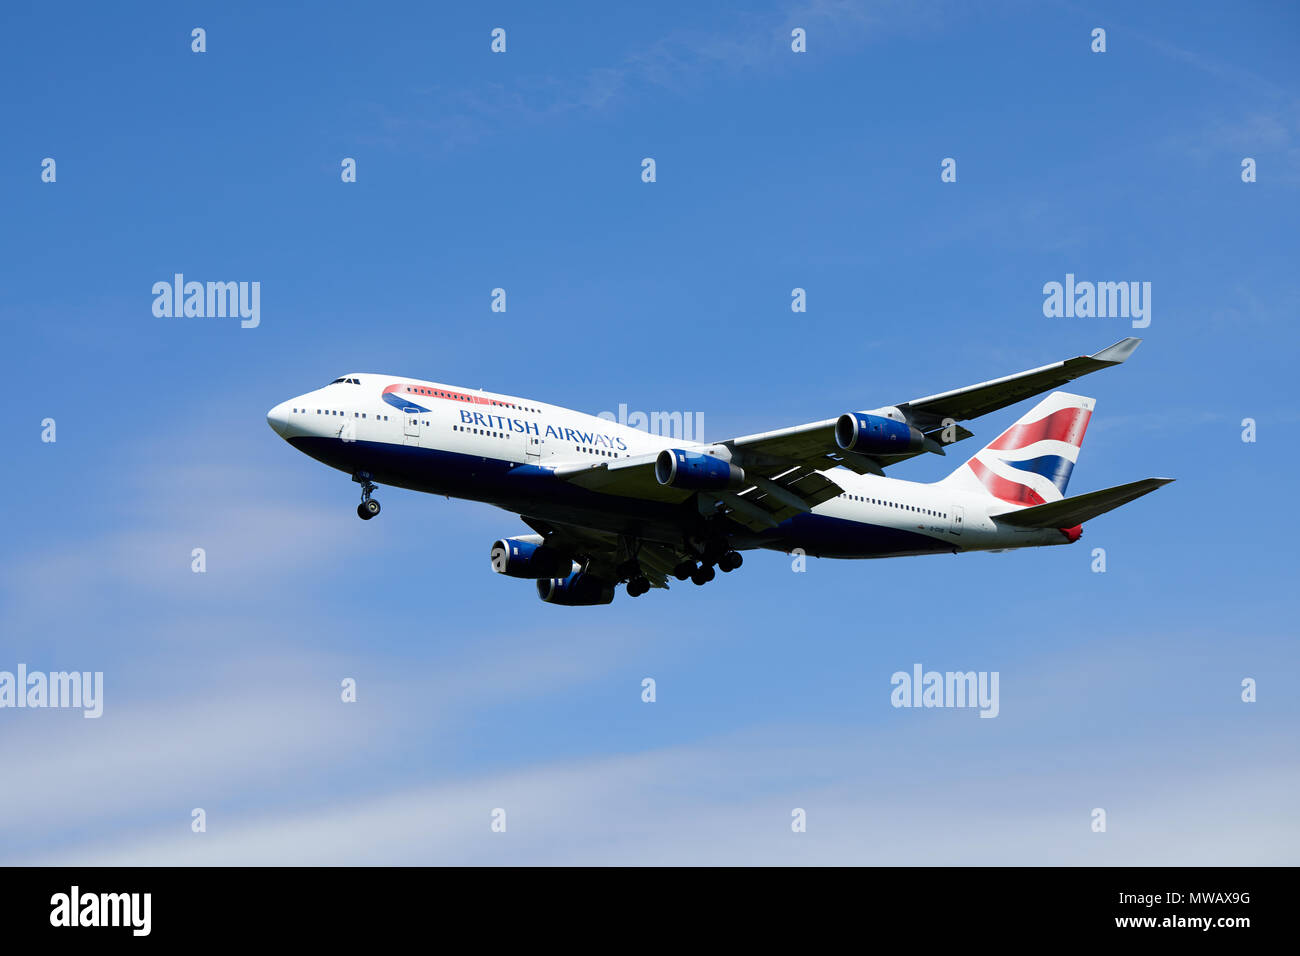 A British Airways Boeing 747-436 aircraft, registration number G-CIVB, as it approaches a landing. Stock Photo